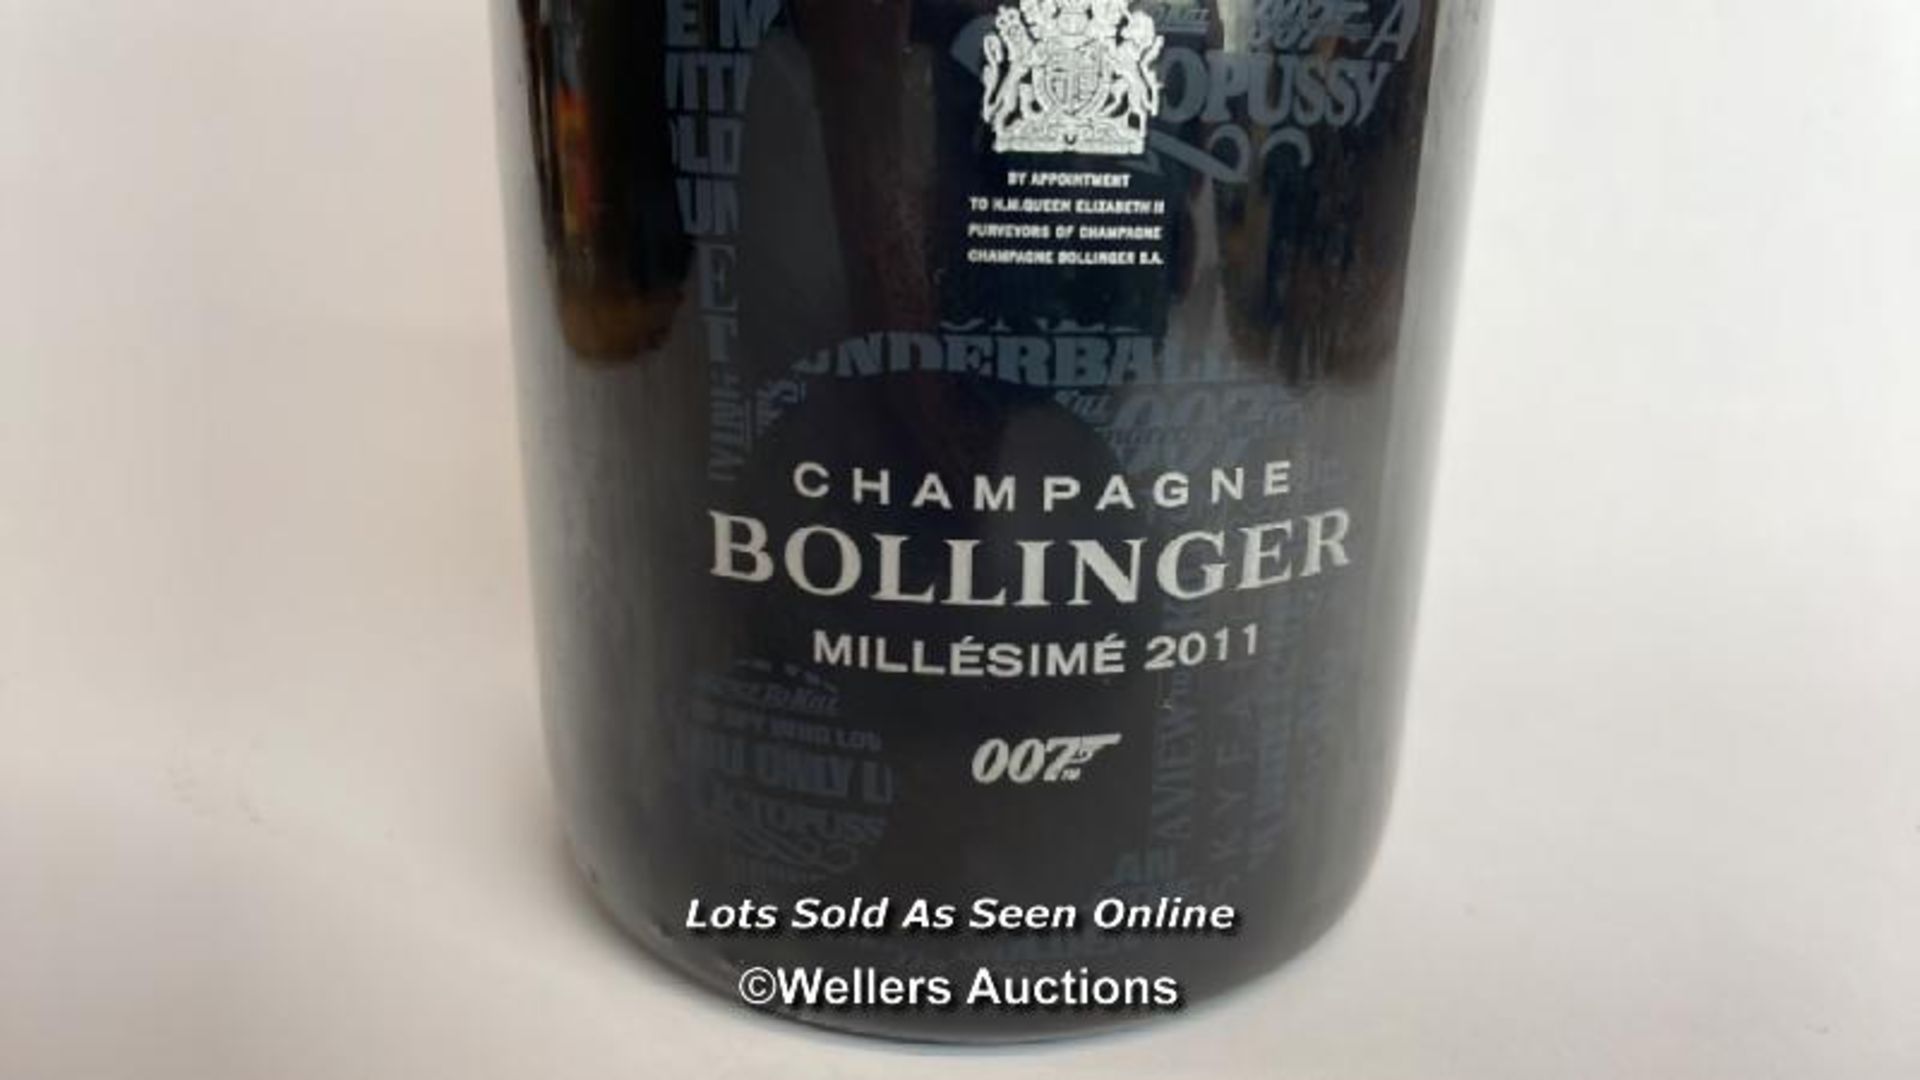 2011 007 Bollinger Champagne, Millesime, 75cl, 12% vol / Please see images for fill level and - Image 2 of 8